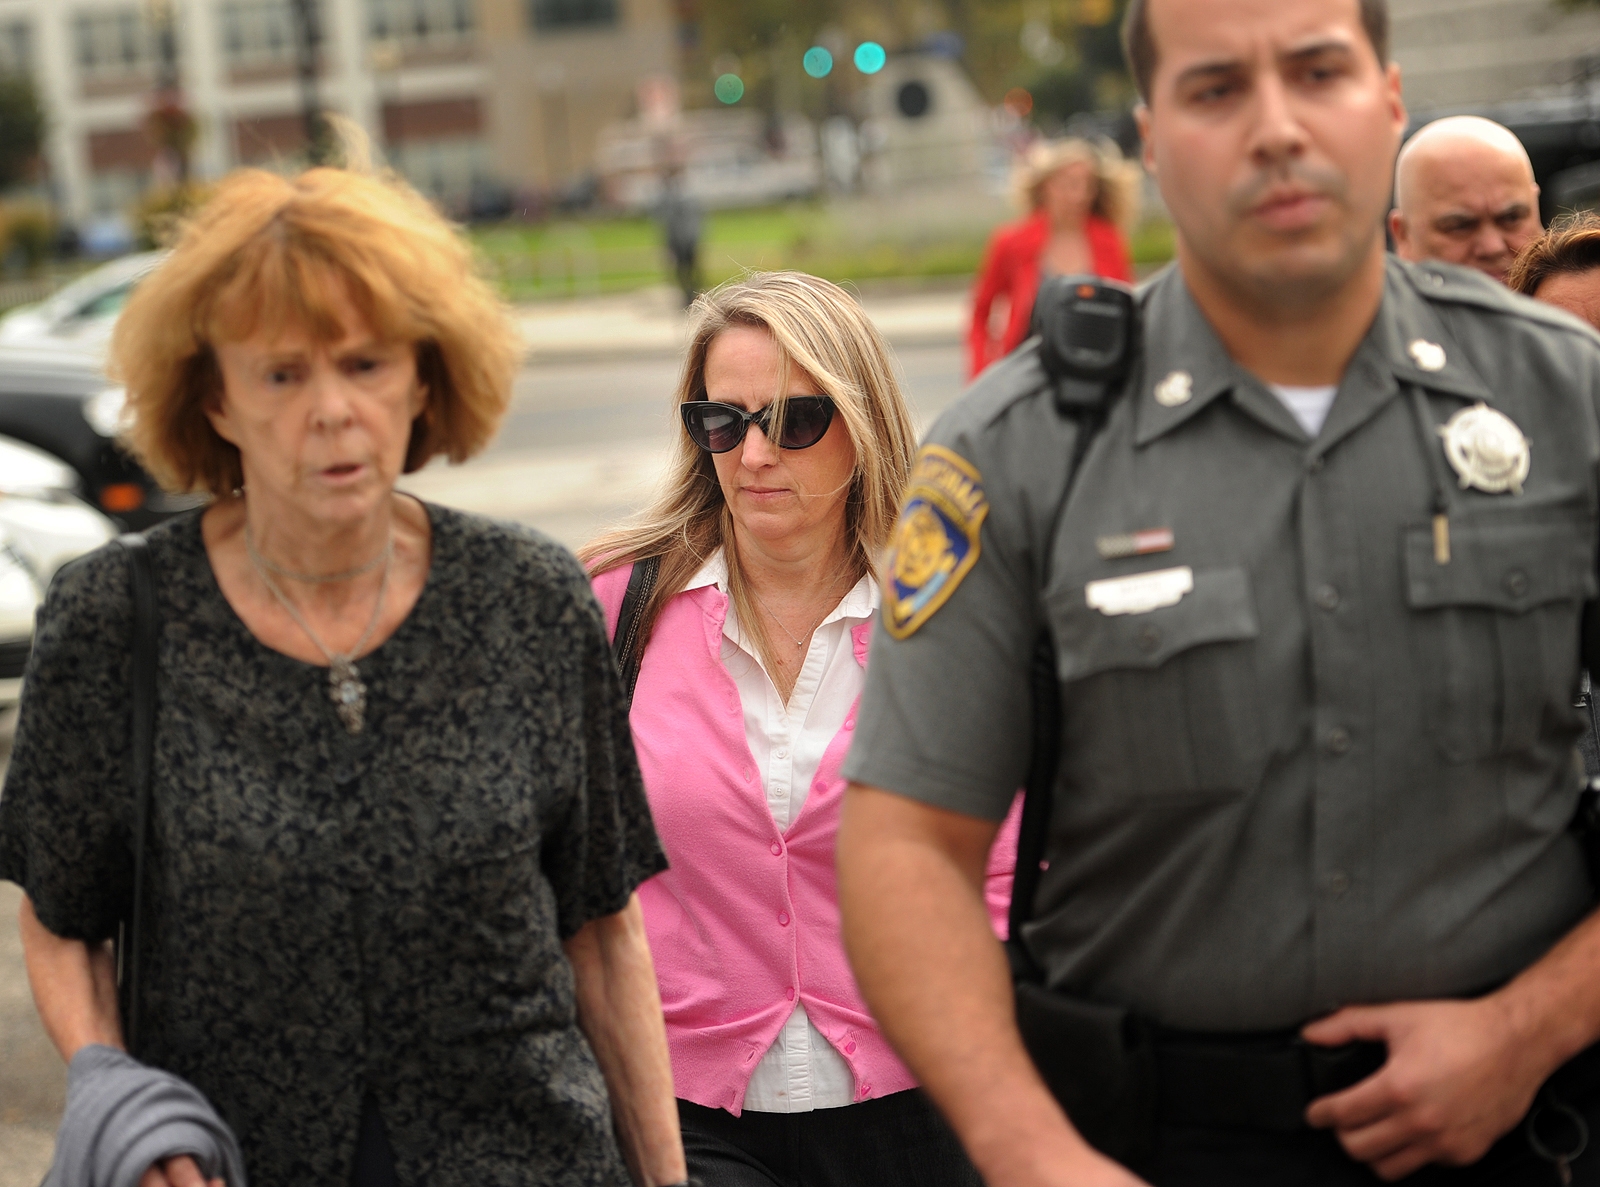 In this Tuesday, Oct. 13, 2015, photo, Jennifer Connell, center, is escorted to her car by marshals after her lawsuit against her Westport nephew was found in his favor in Superior Court in Bridgeport, Conn. She sued her nephew, who was eight-years-old at the time of the incident, for breaking her wrist after jumping into her arms at his birthday party. (Brian A. Pounds/Hearst Connecticut Media via AP) MANDATORY CREDIT